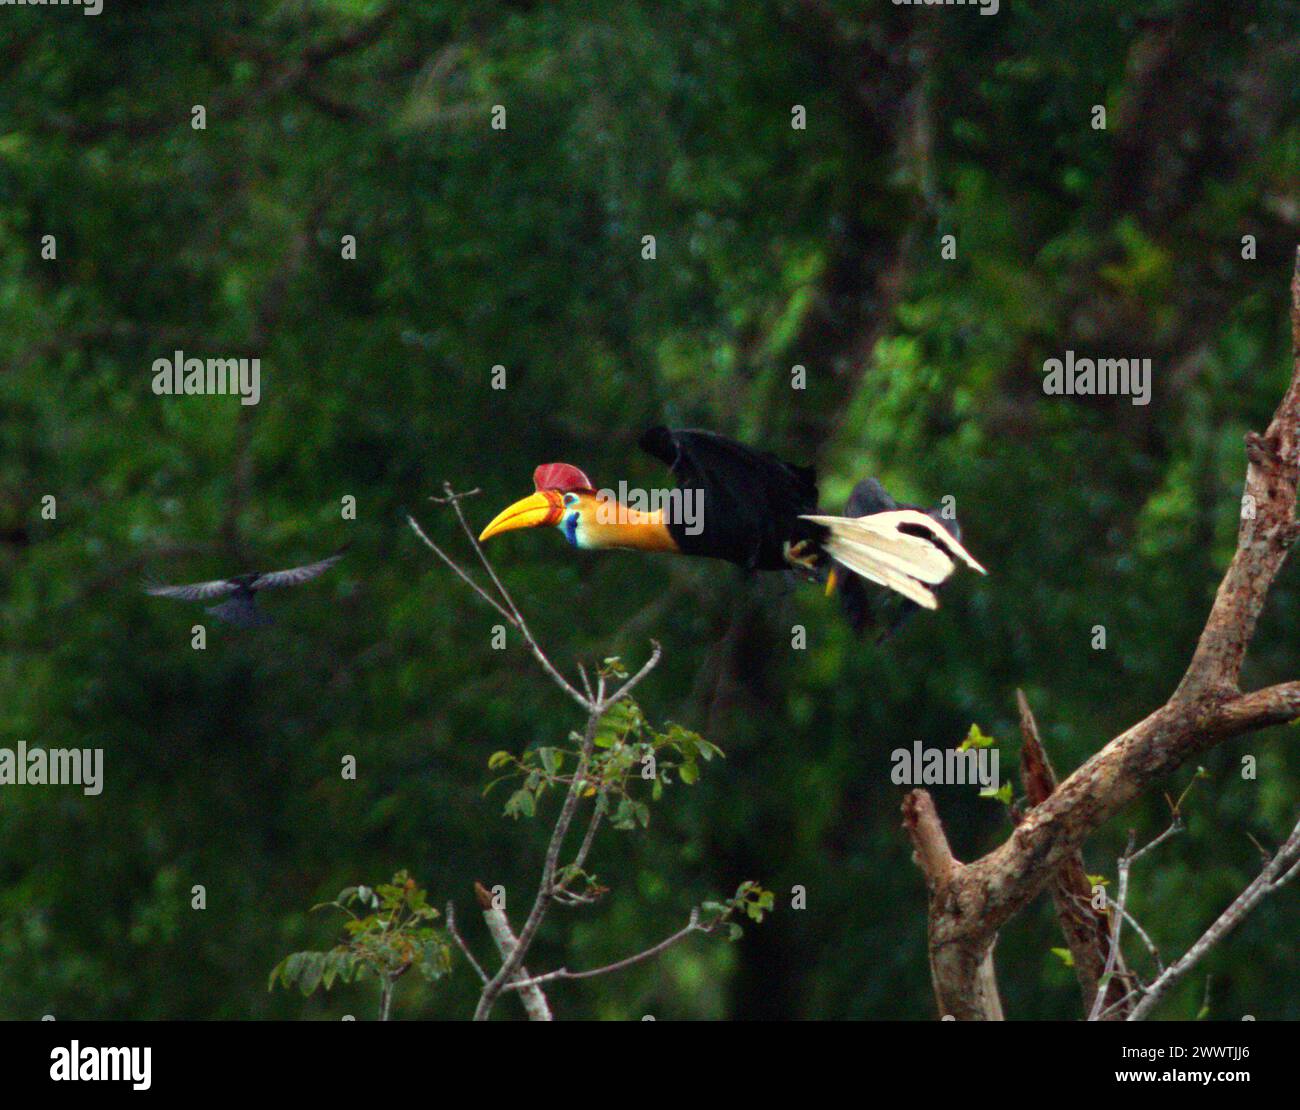 Knobbed hornbill (Rhyticeros cassidix) male flies as it is leaving a tree-top while foraging in a vegetated area near Mount Tangkoko and Mount Duasudara (Dua Saudara) in Bitung, North Sulawesi, Indonesia. The International Union for Conservation of Nature (IUCN) concludes that rising temperatures have led to—among others—ecological, behavioral, and physiological changes in wildlife species and biodiversity. 'In addition to increased rates of disease and degraded habitats, climate change is also causing changes in species themselves, which threaten their survival,' they wrote. Stock Photo